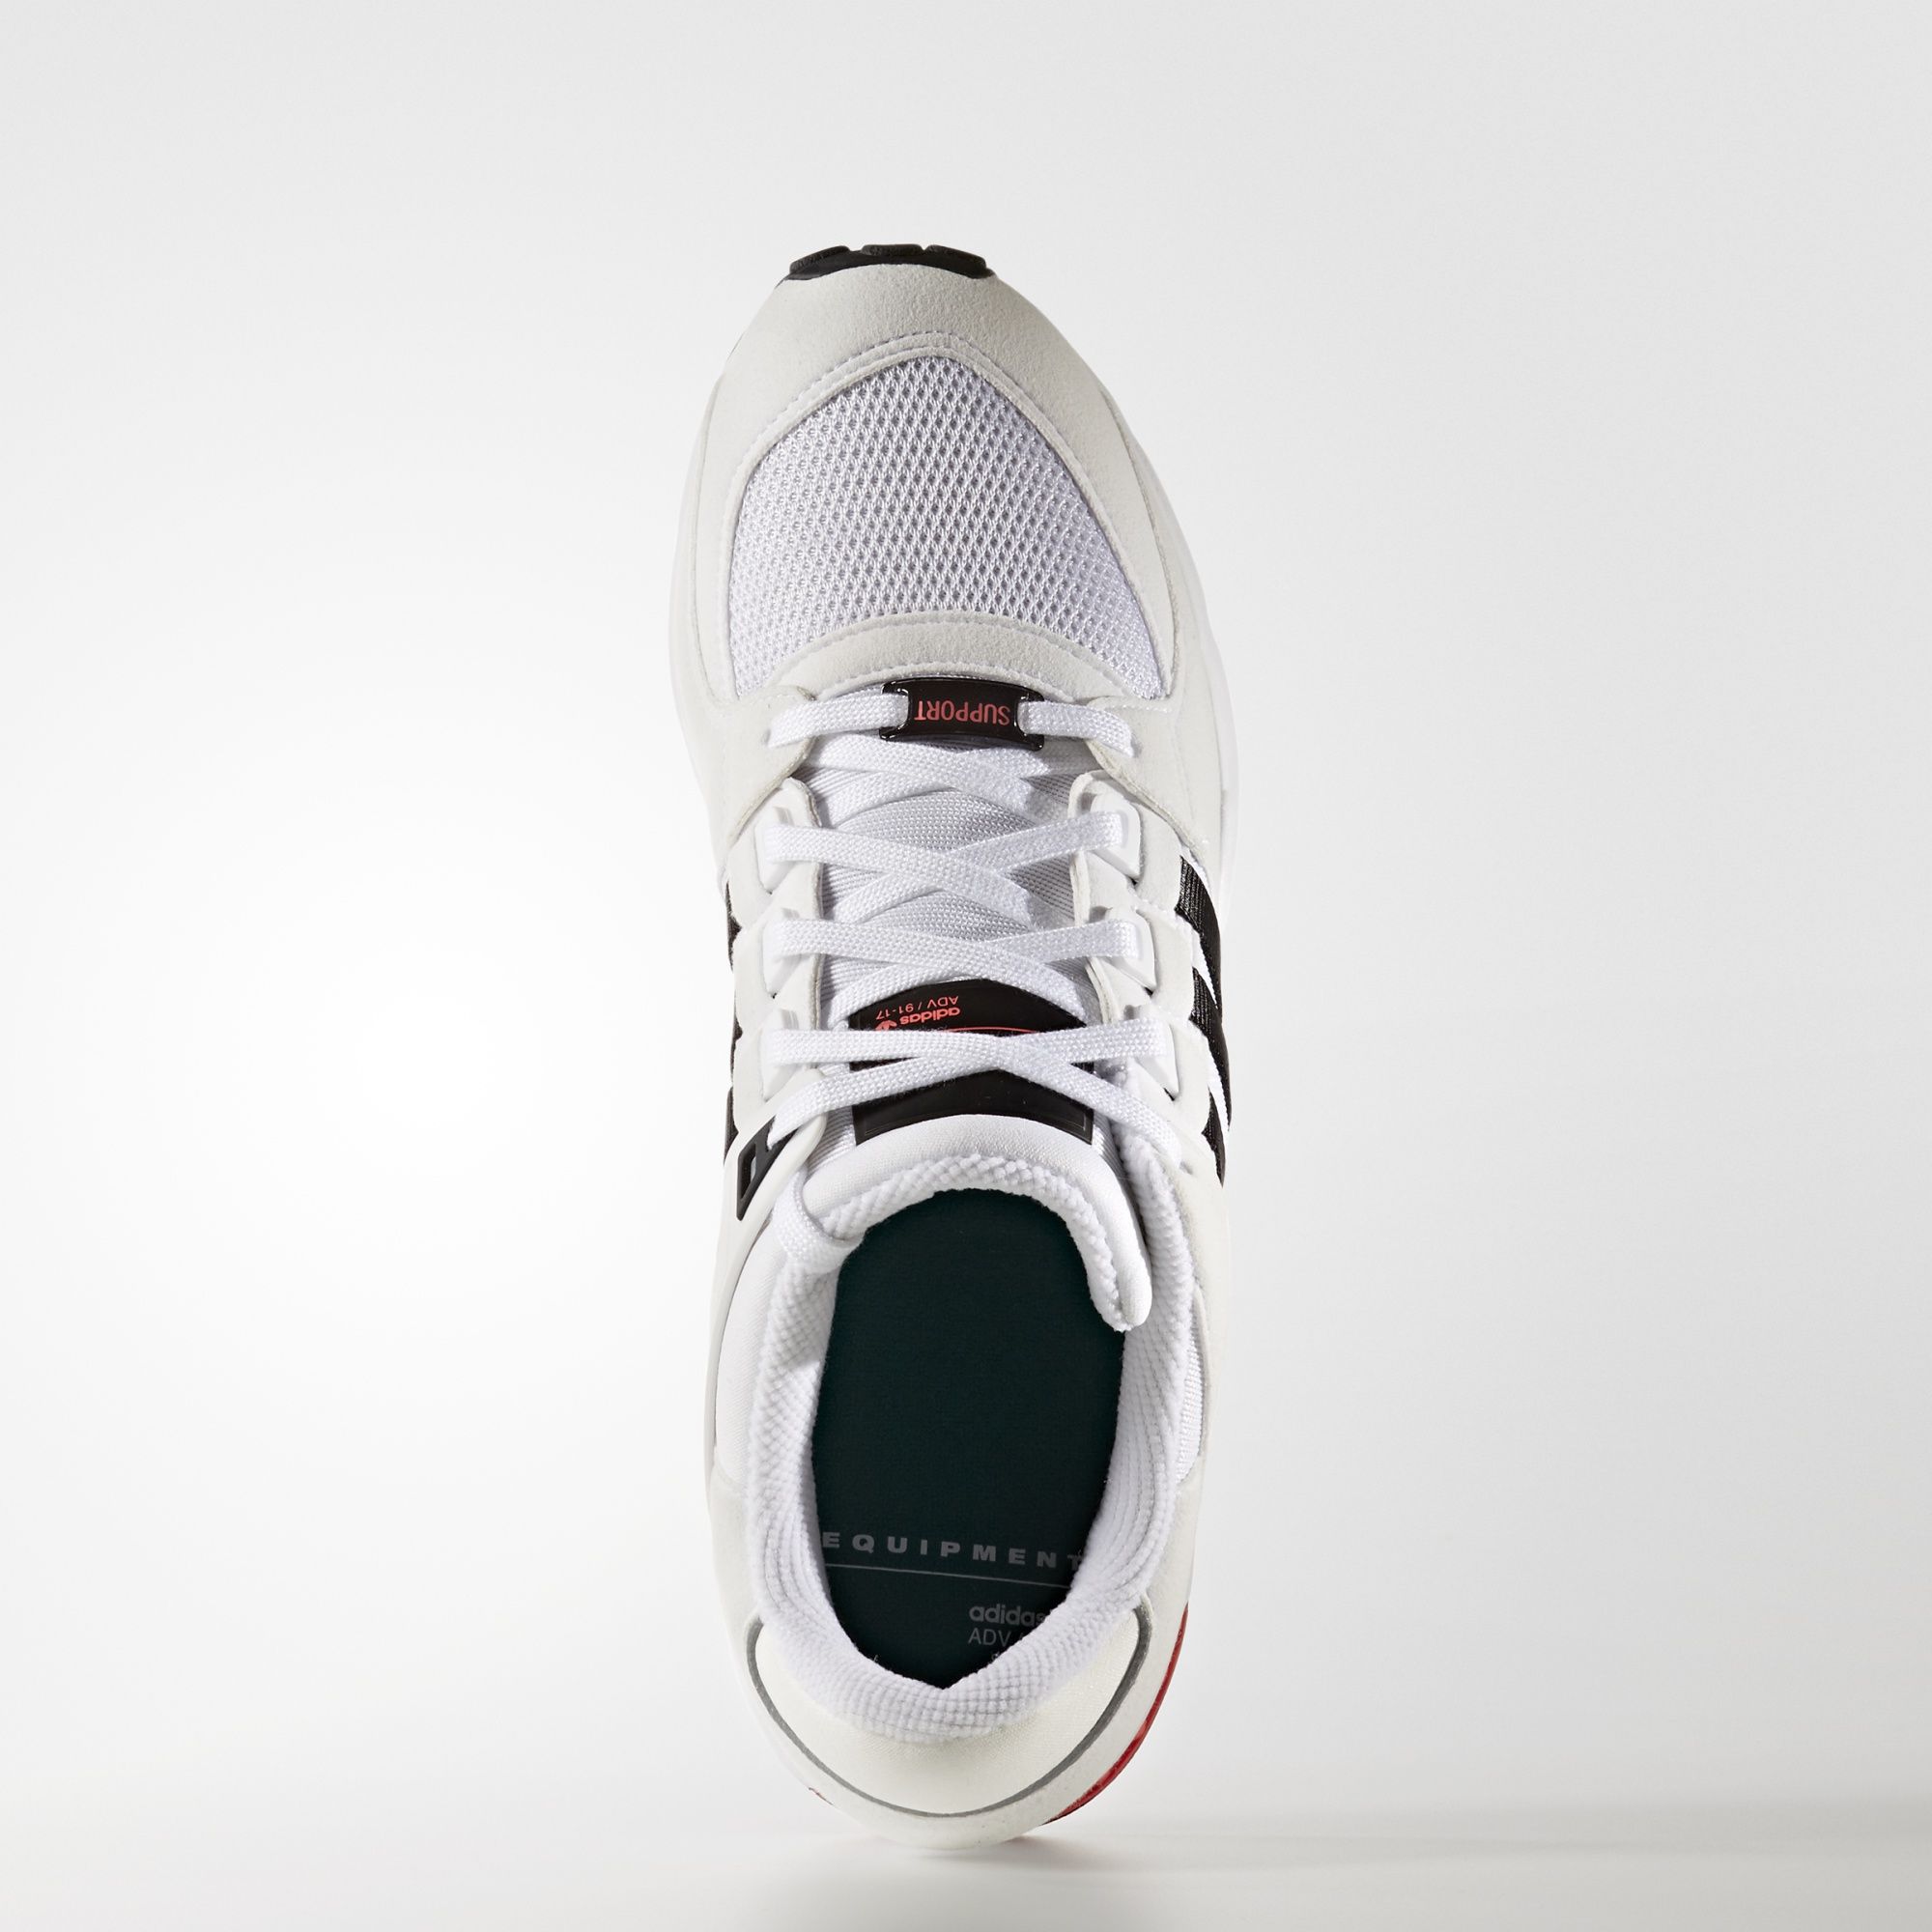 adidas-eqt-support-rf-white-turbo-red-4